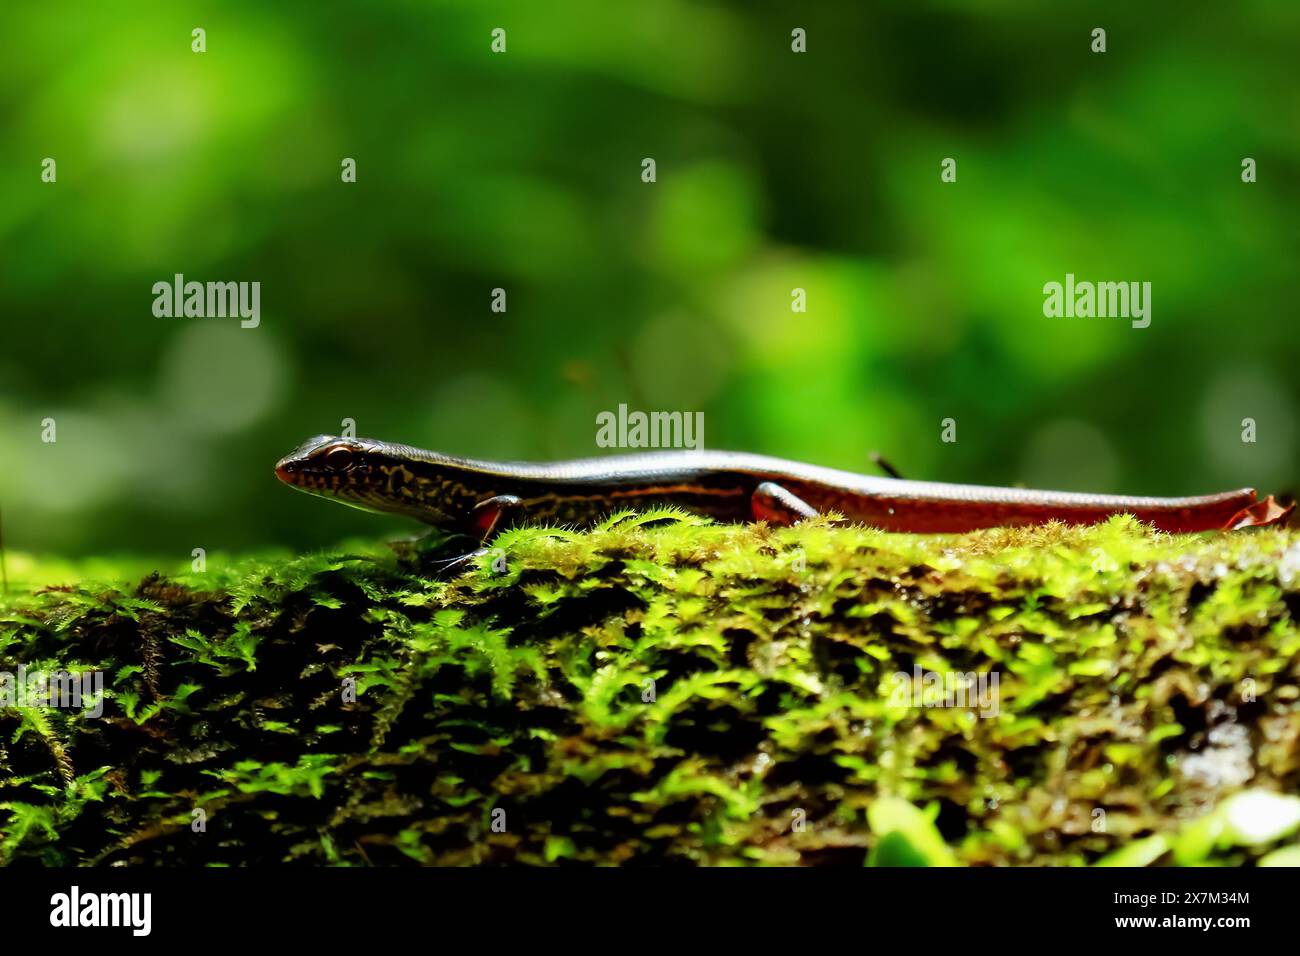 Close-up of an elegant skink lizard basking in the sun in its natural habitat. Showcasing the species' vibrant colors and unique patterns. Wulai, Taiw Stock Photo